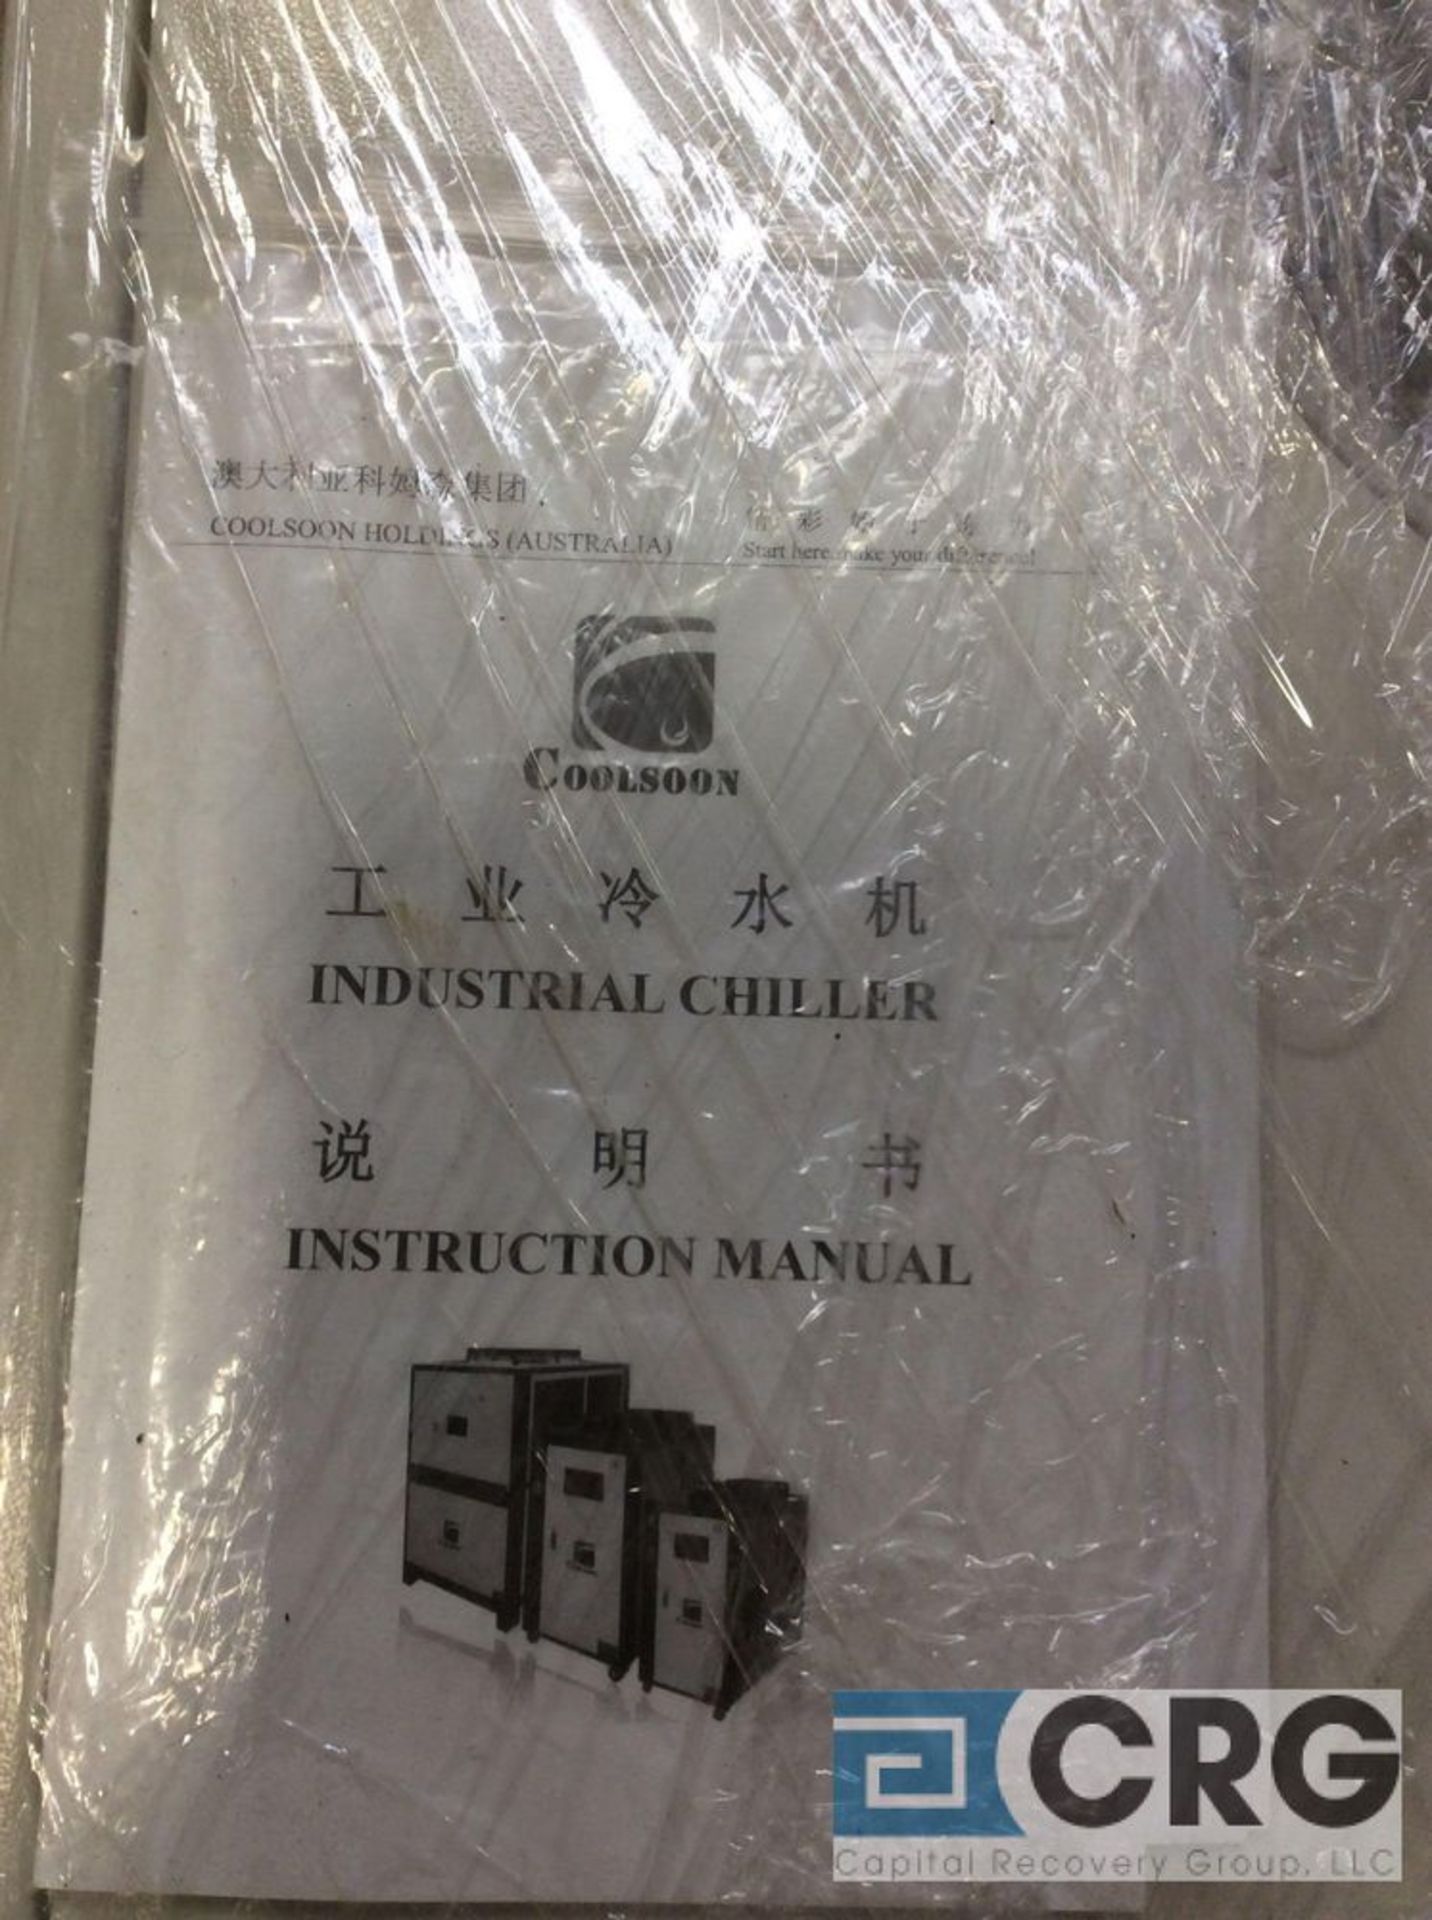 Portable industrial chiller with digital controls (NEW AND IN PACKAGING), subject to entirety bid - Image 2 of 3